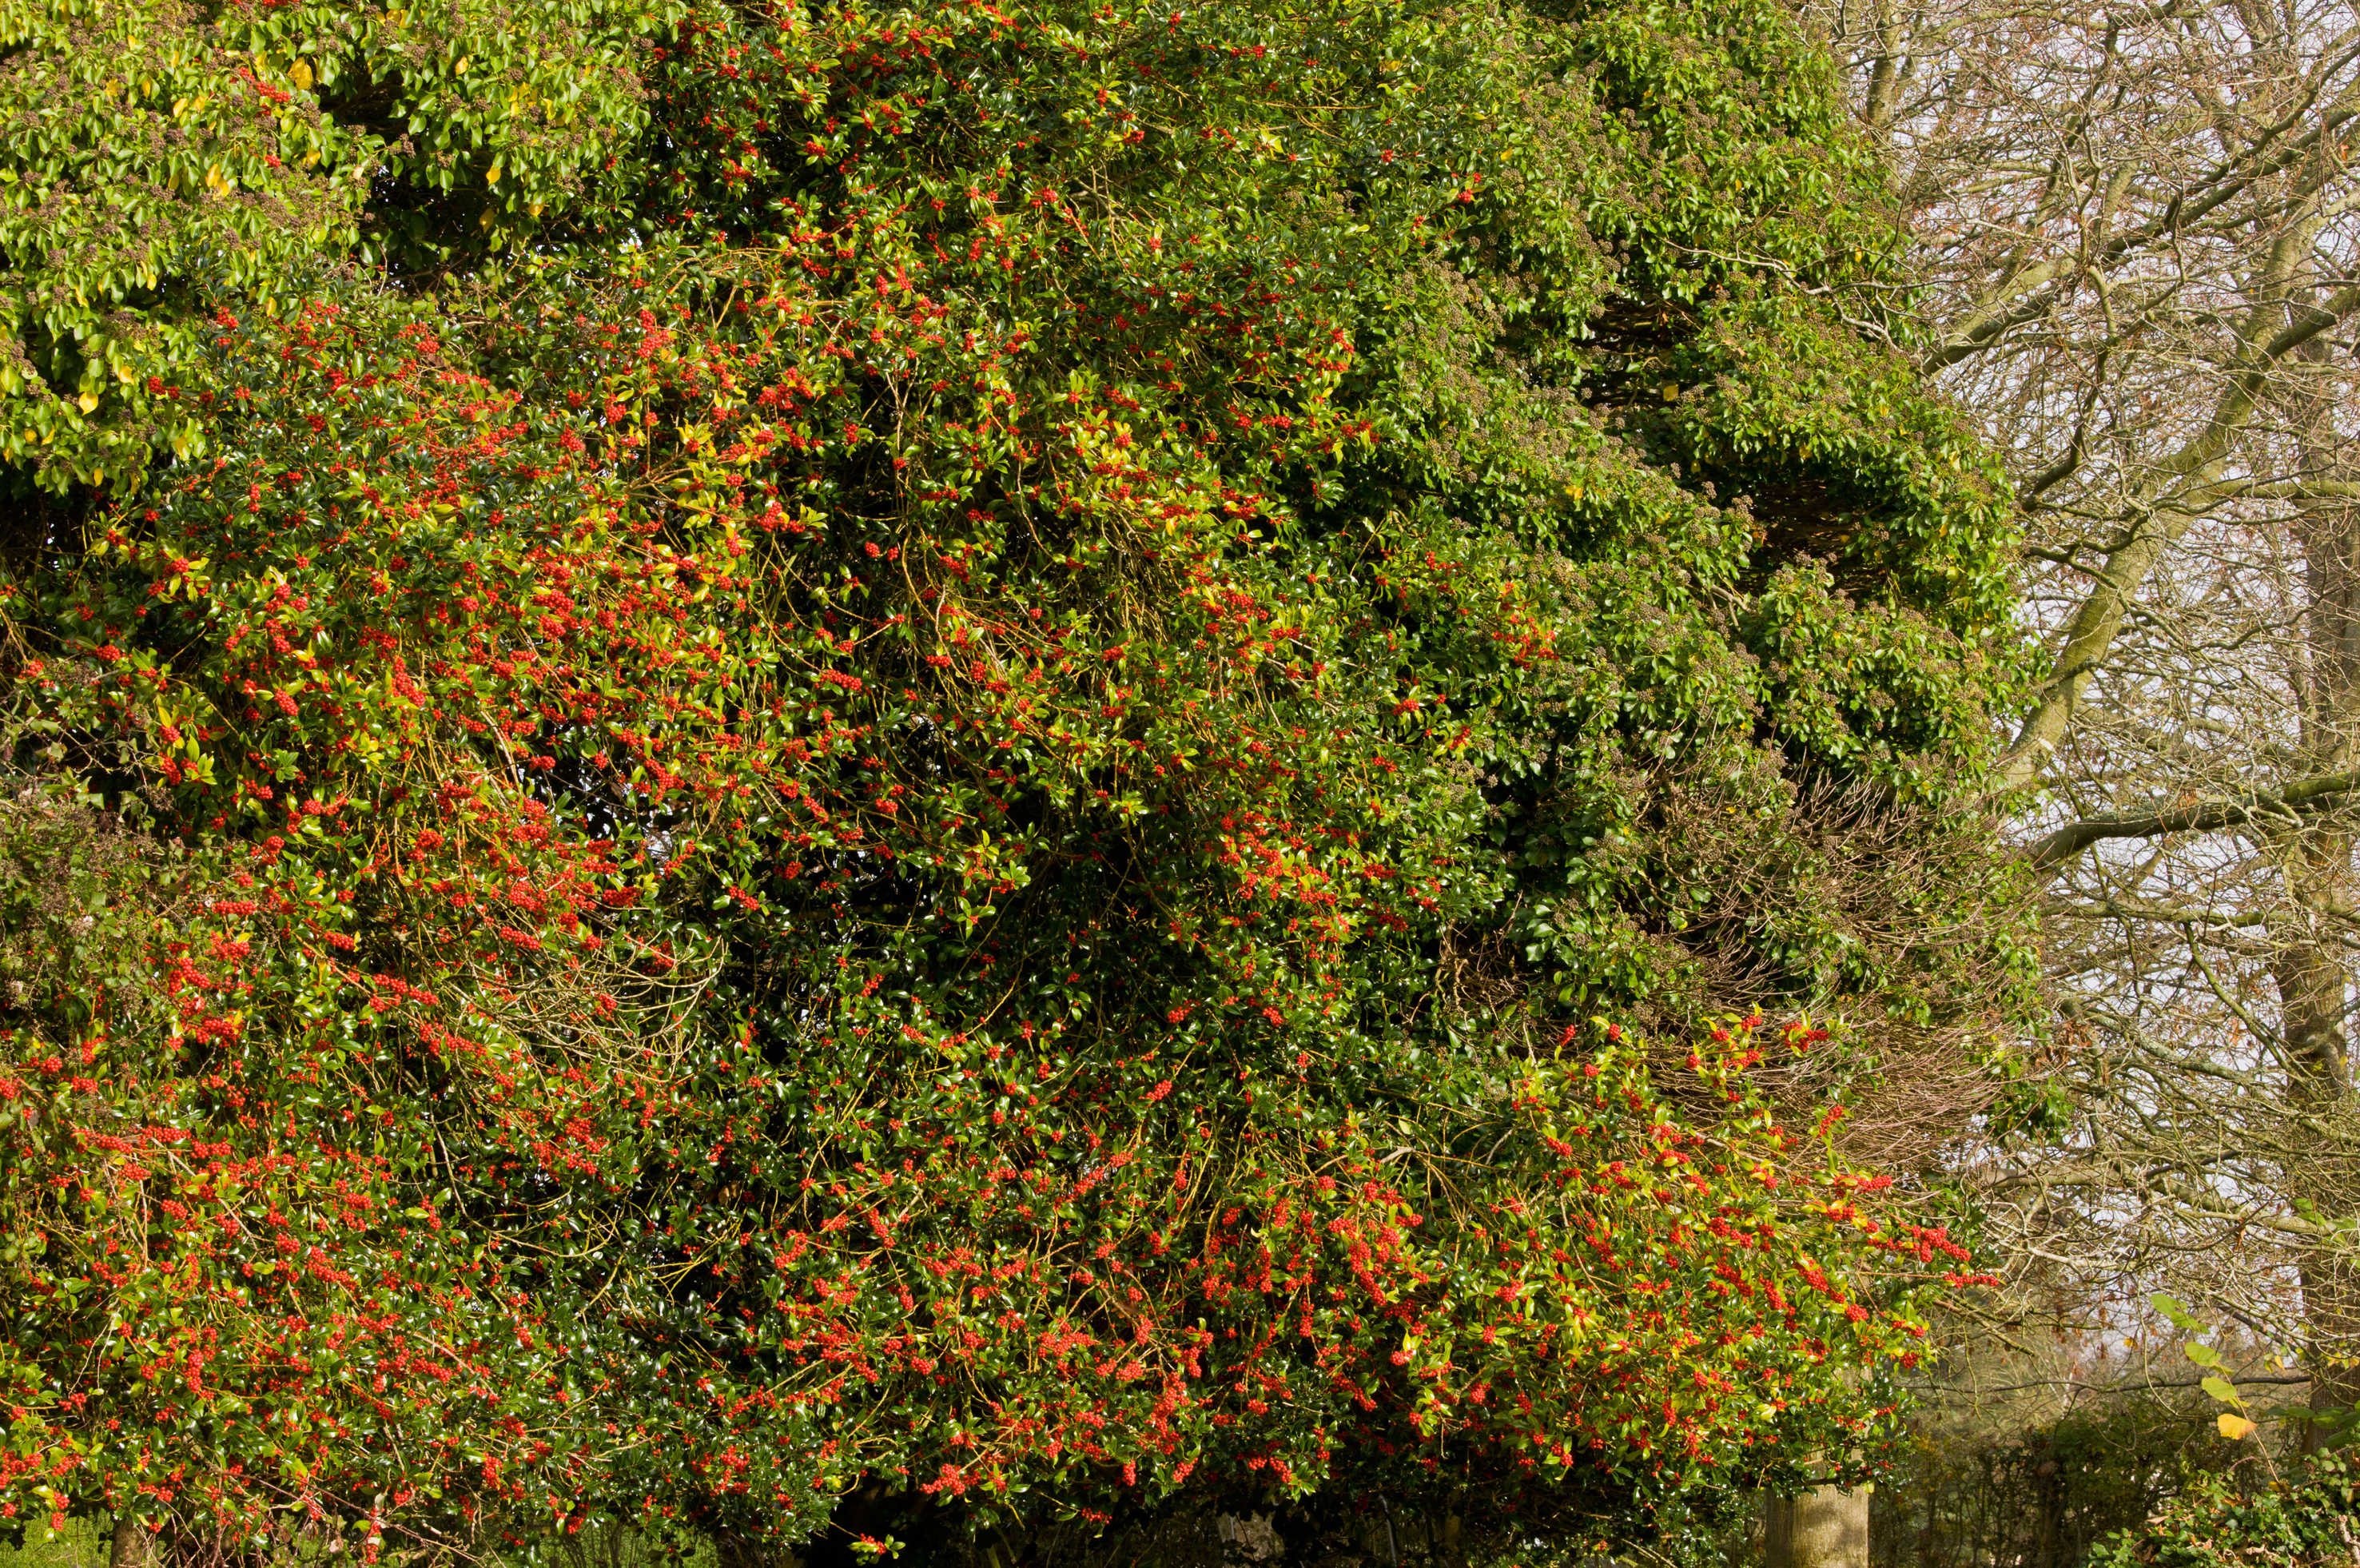 Mass of holly in berry and ivy in flower in mature hedge